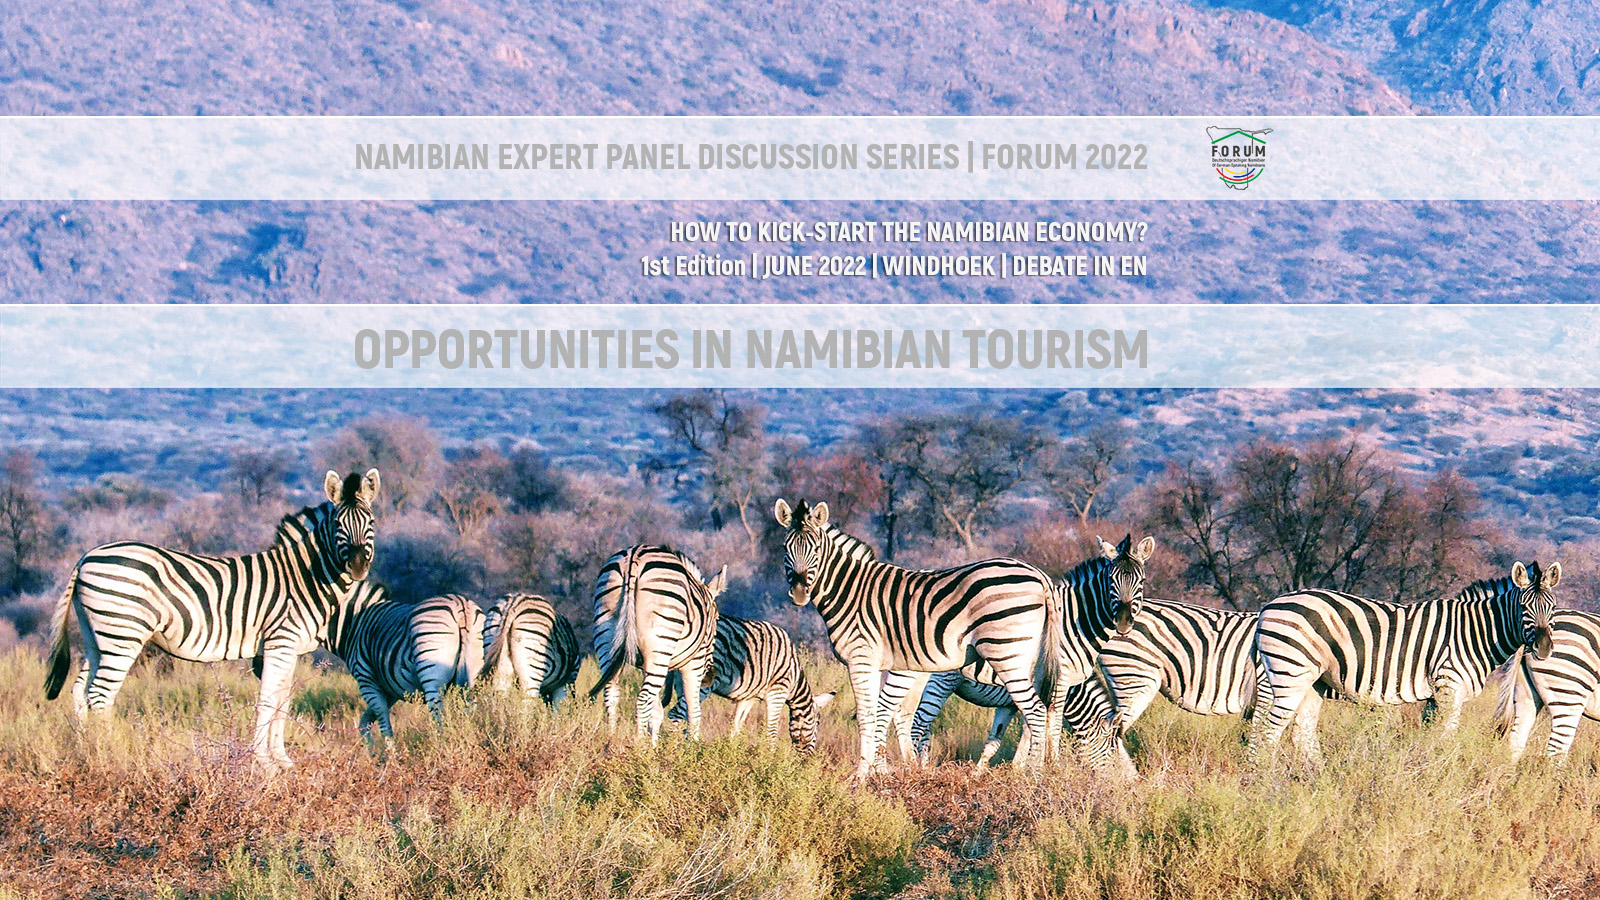 Job opportunities in Namibian tourism | 1st Edition Namibian Expert Panel Series | FORUM 2022